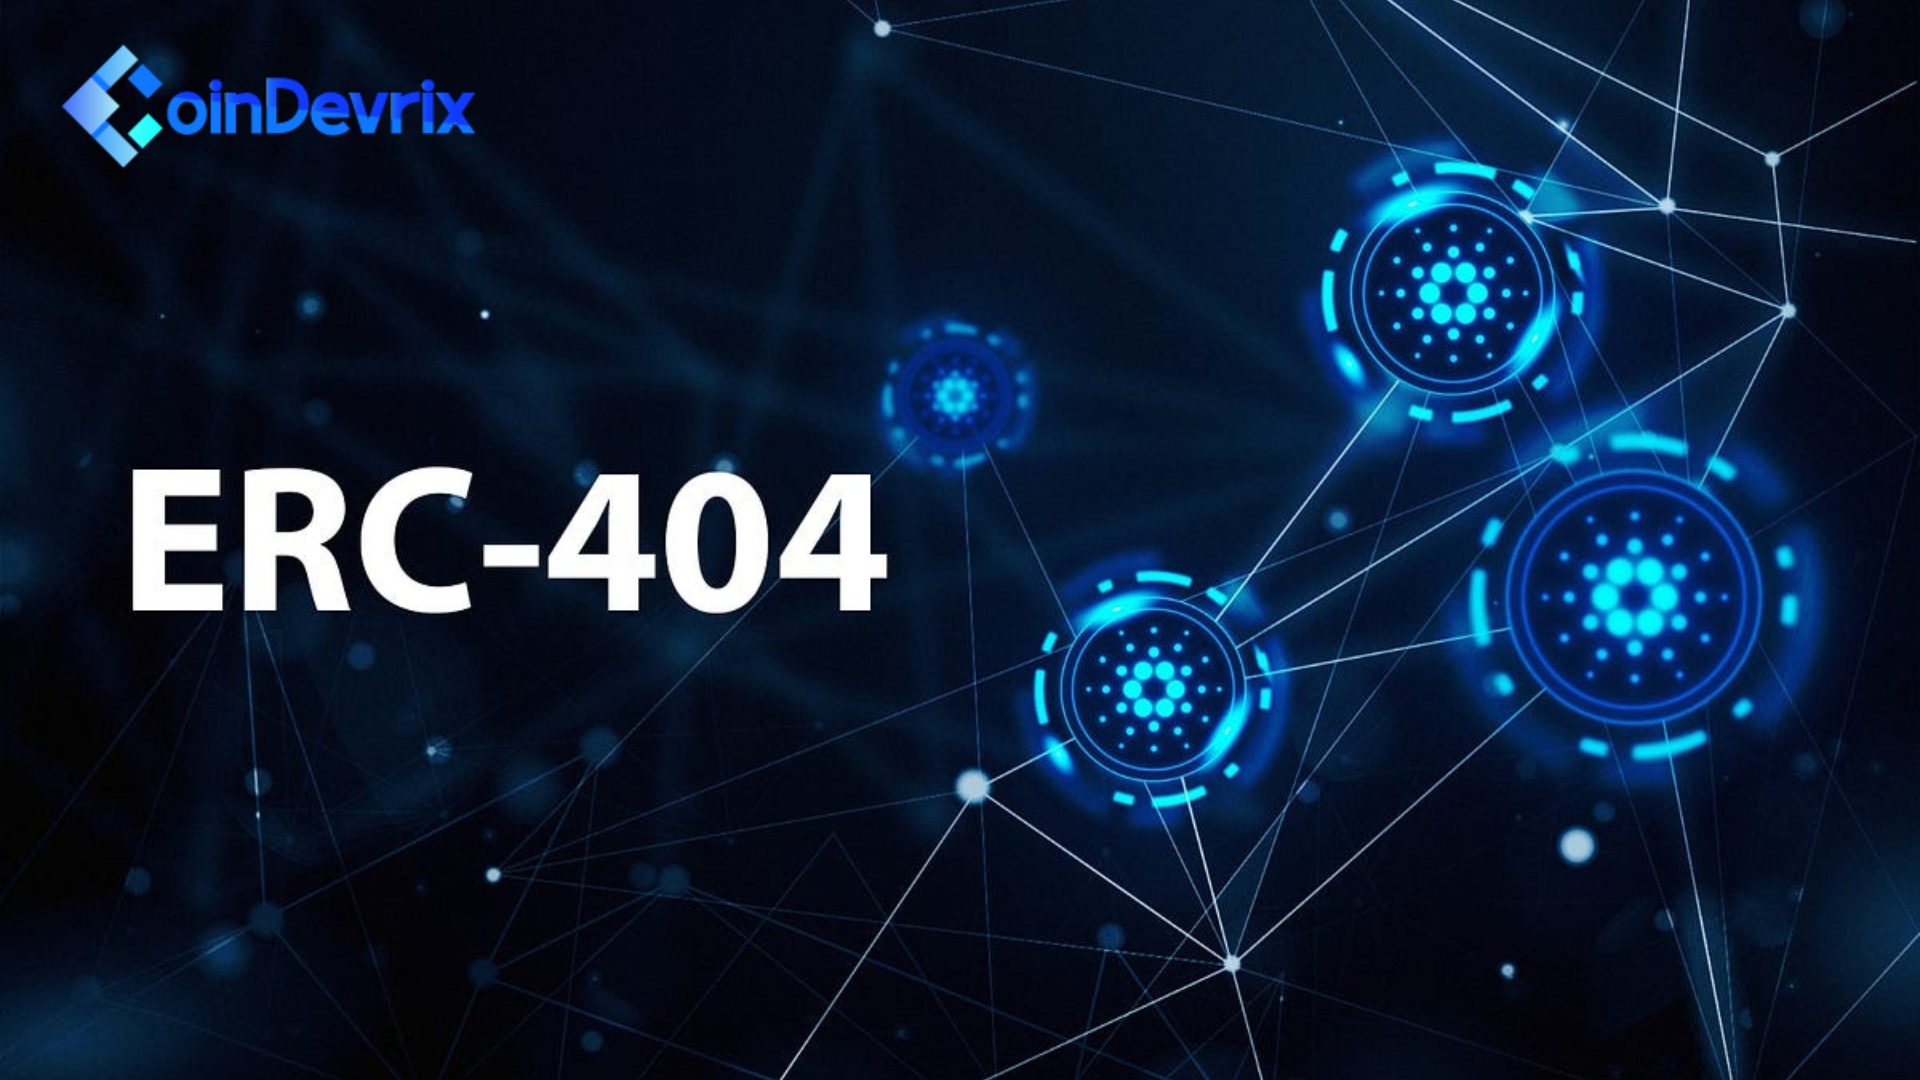 How does ERC-404 Work?